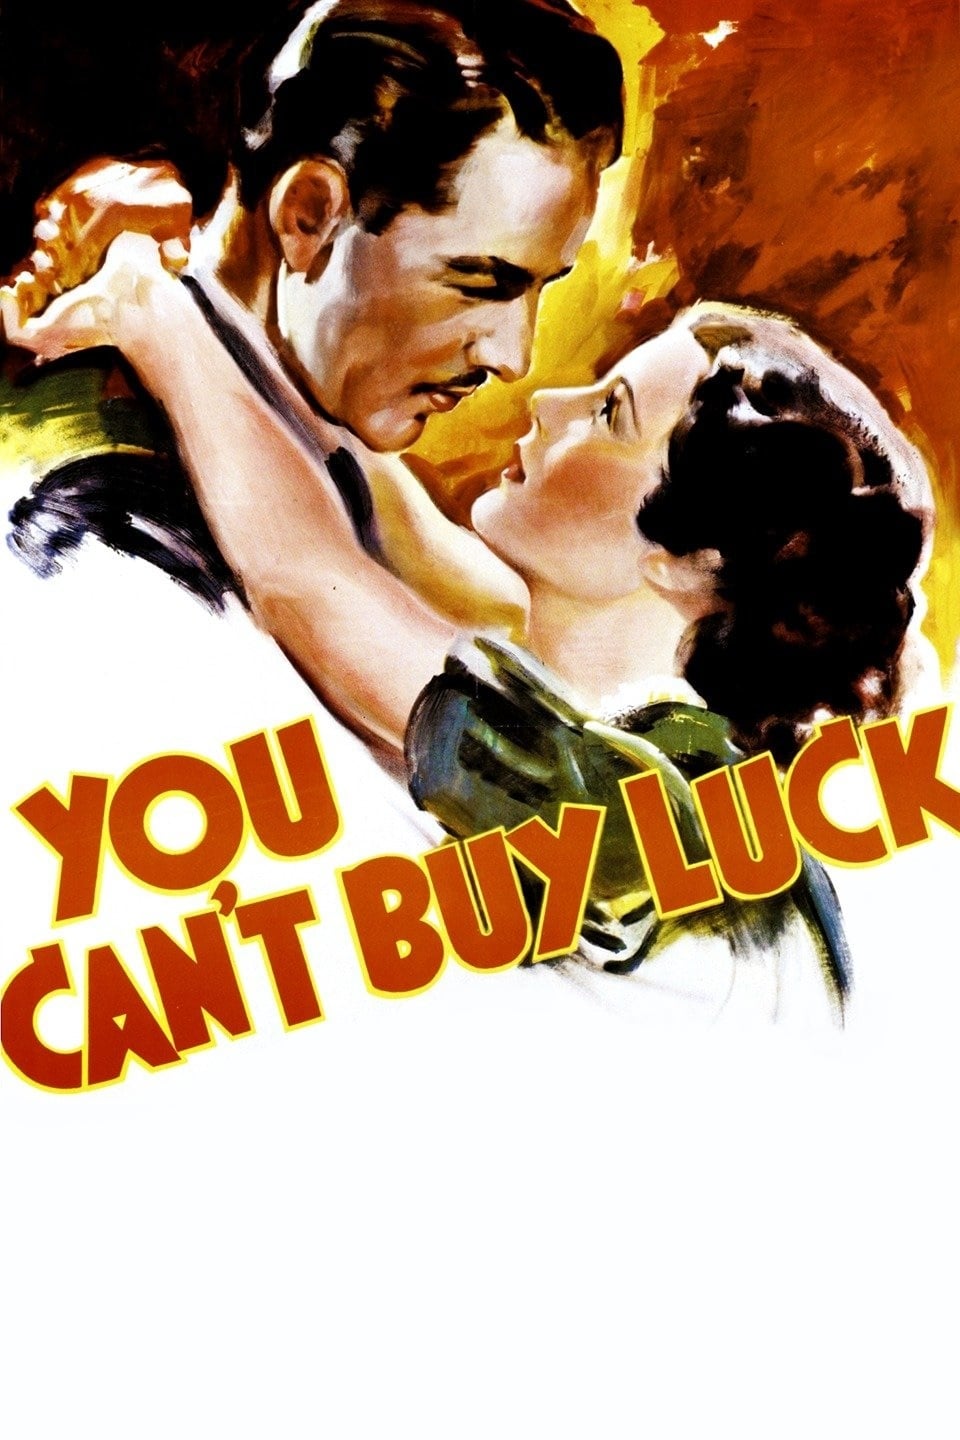 You Can't Buy Luck